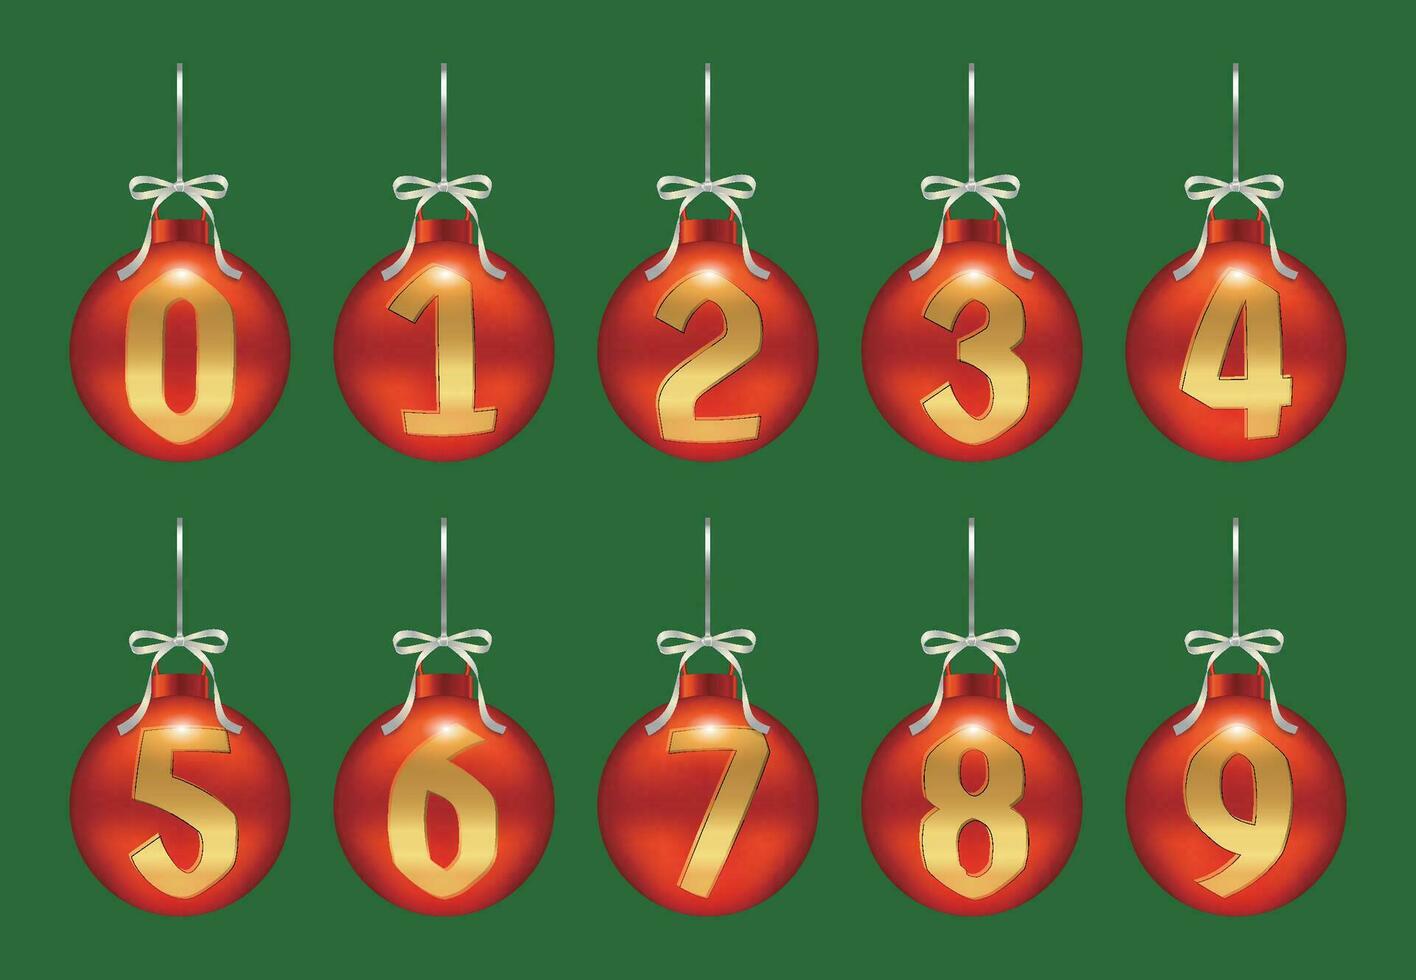 Christmas decoration with metal letters with numbers 0-9 on the surface of red balls for Christmas and New Year vector